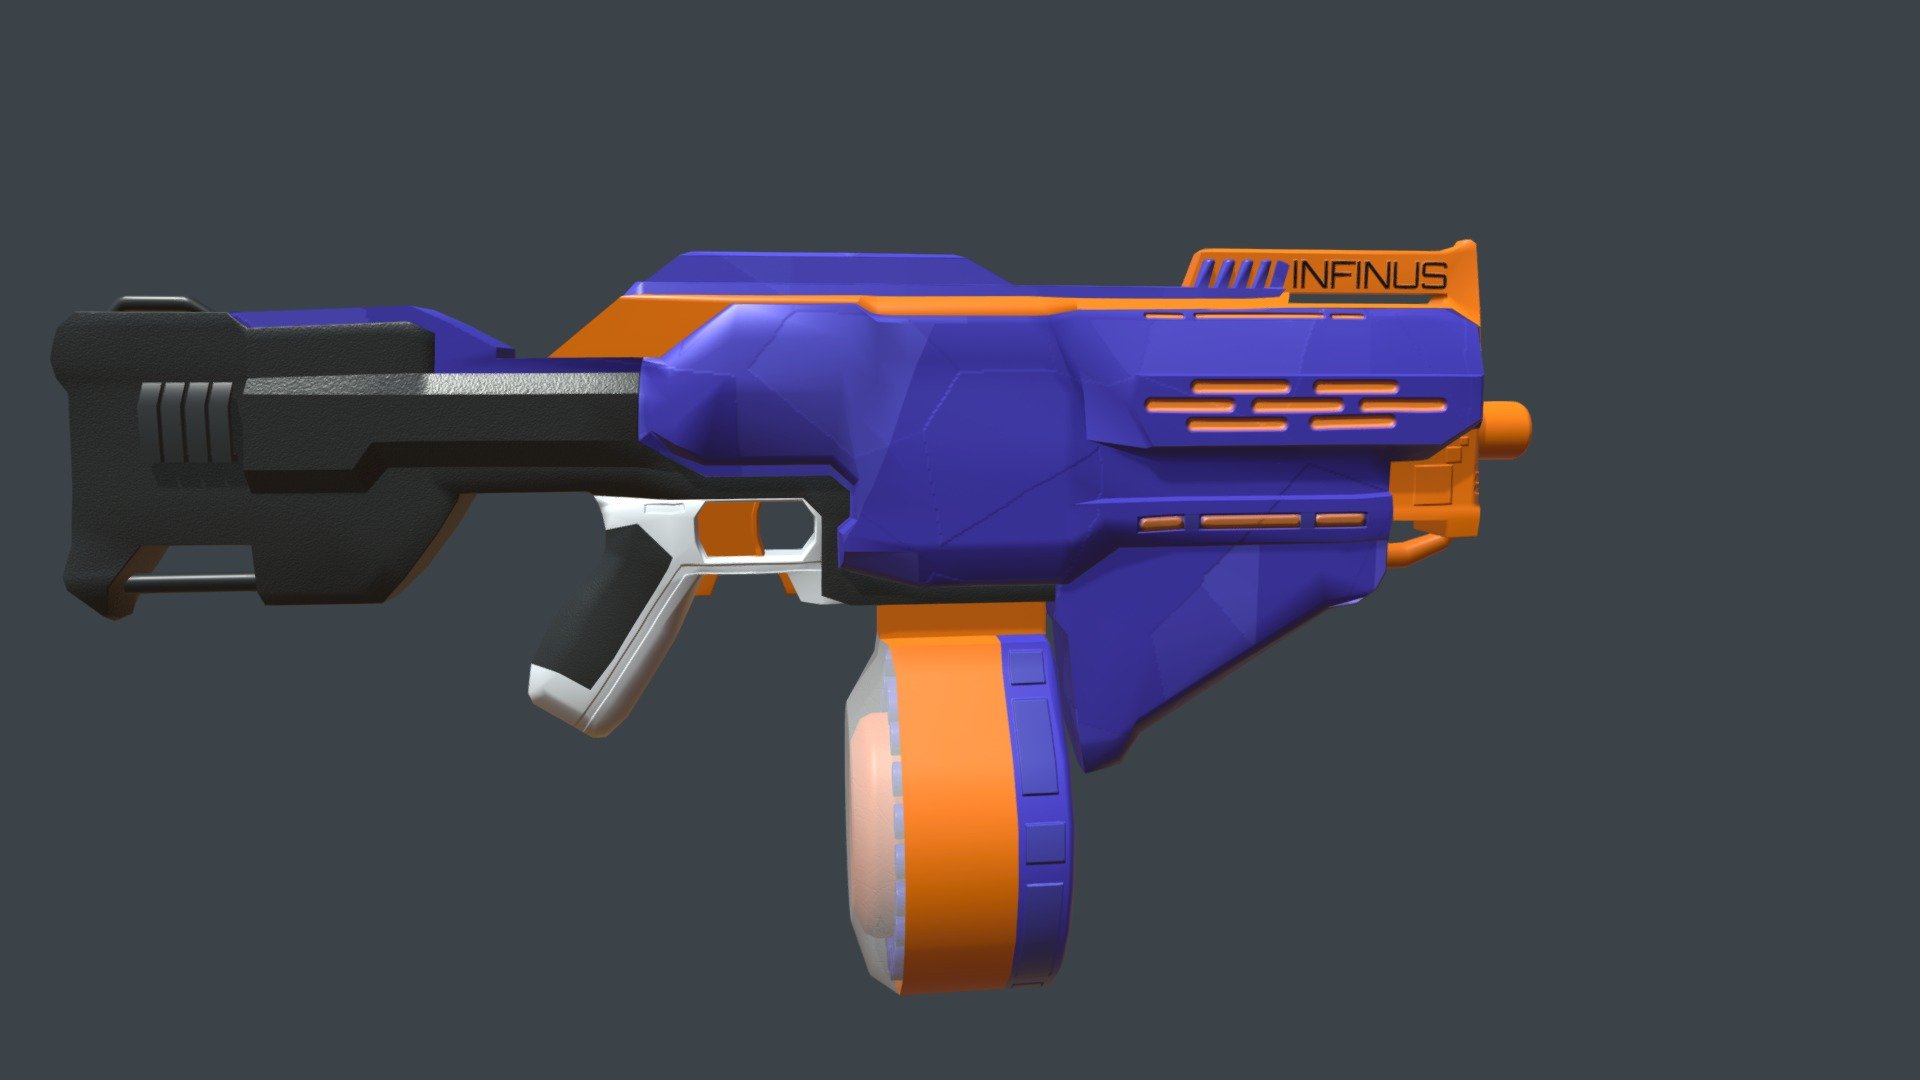 Modeled, animated, and textured nerf gun

Reference: https://www.walmart.com/ip/Nerf-N-strike-Elite-Infinus-with-Speed-Load-Technology-30-Dart-Drum-and-30-Nerf-Elite-Darts/606554546 - Nerf Infinus - 3D model by rollthebryce 3d model